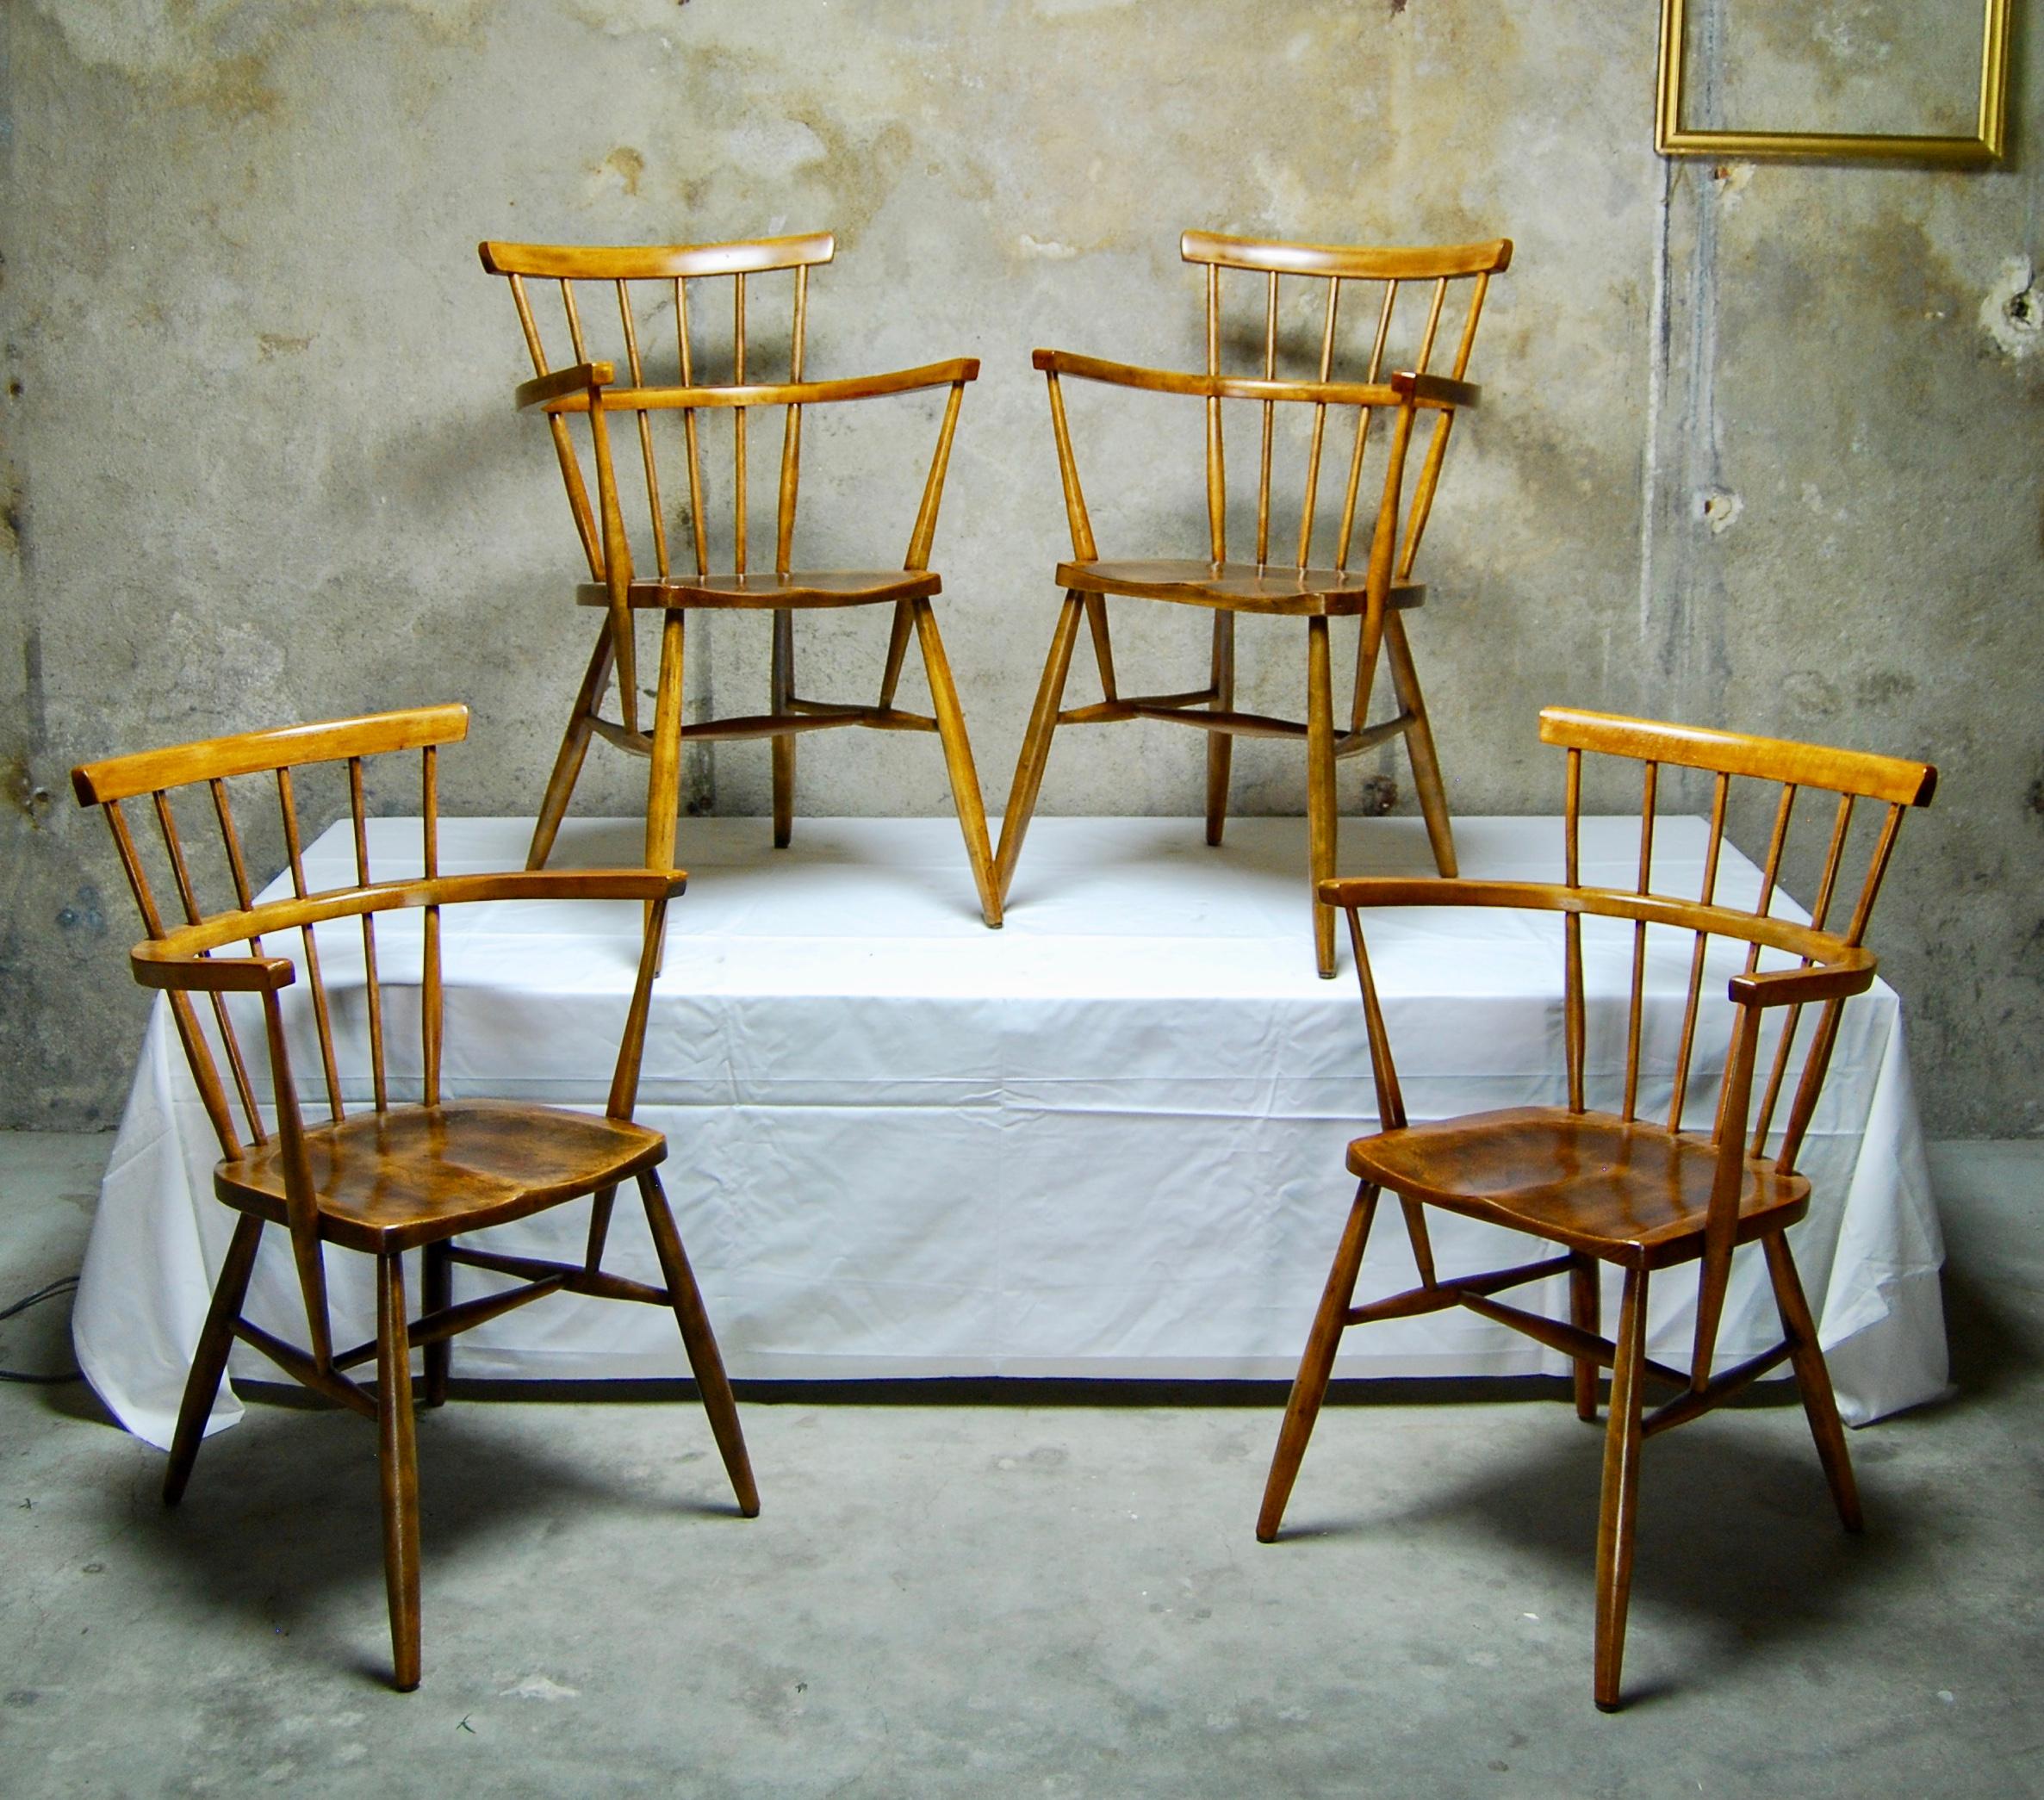 Set of 4 beautiful Windsor armchairs originating from Sweden.
Turned spindle backs, legs and stretchers provide their strikingly simple Scandinavian lines.
Made of solid wood these chairs are strong and sturdy.
Dating back to the 1950s they have